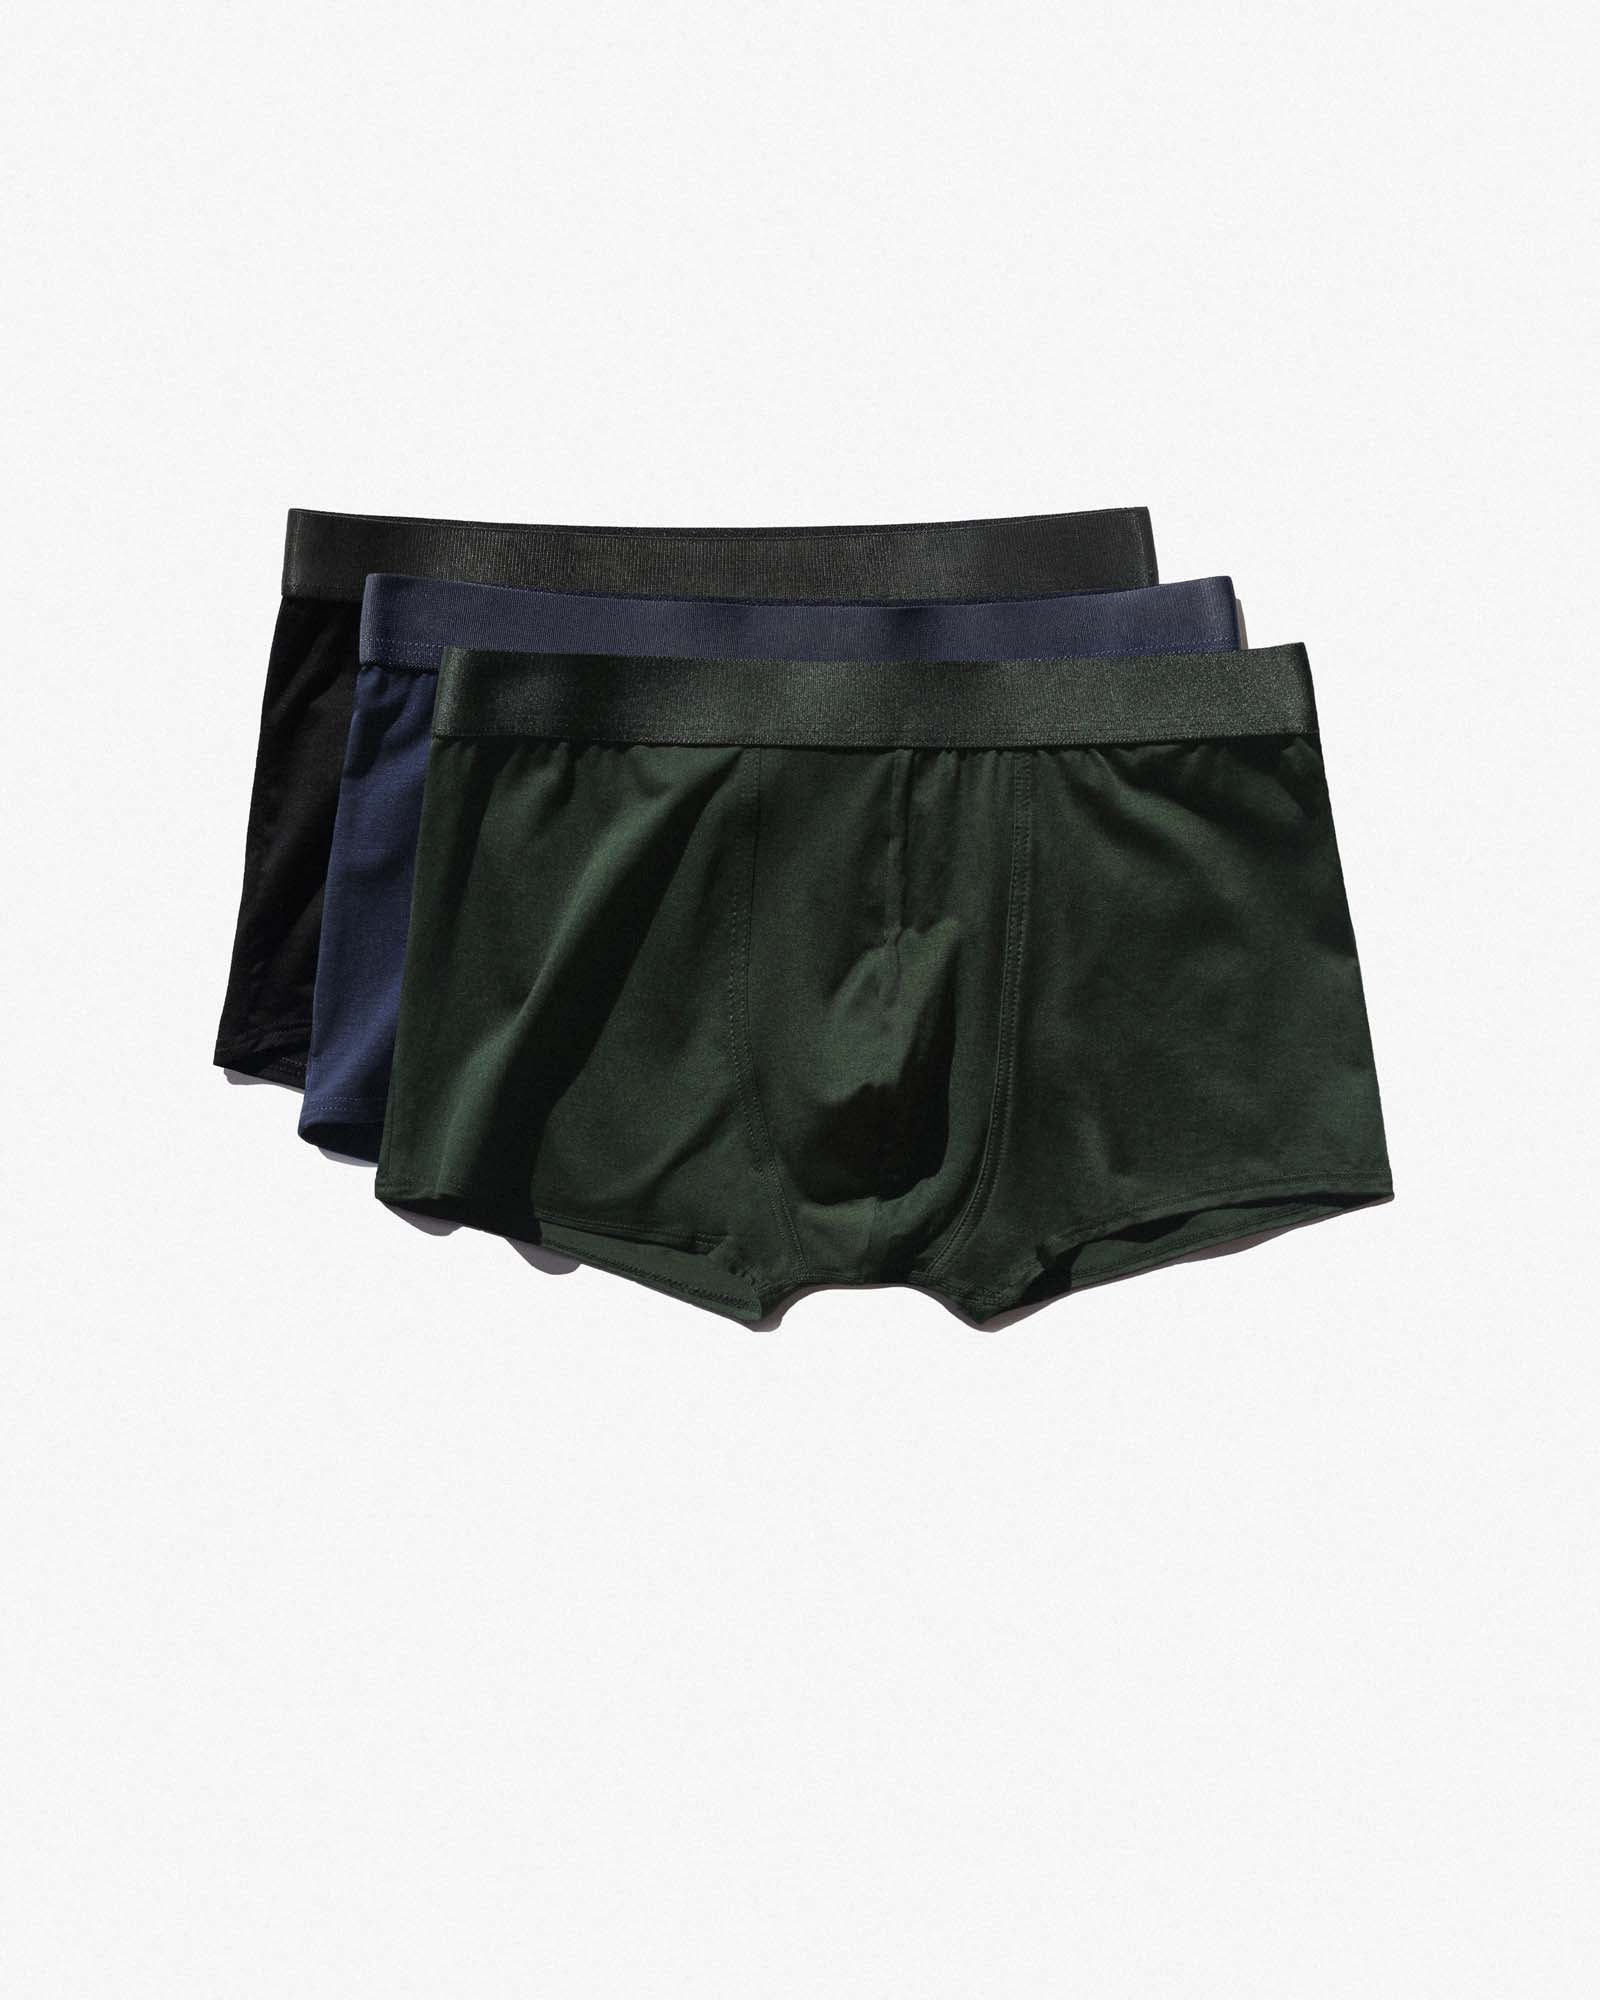 3 × Boxer Trunk in Black + Navy Blue + Army Green